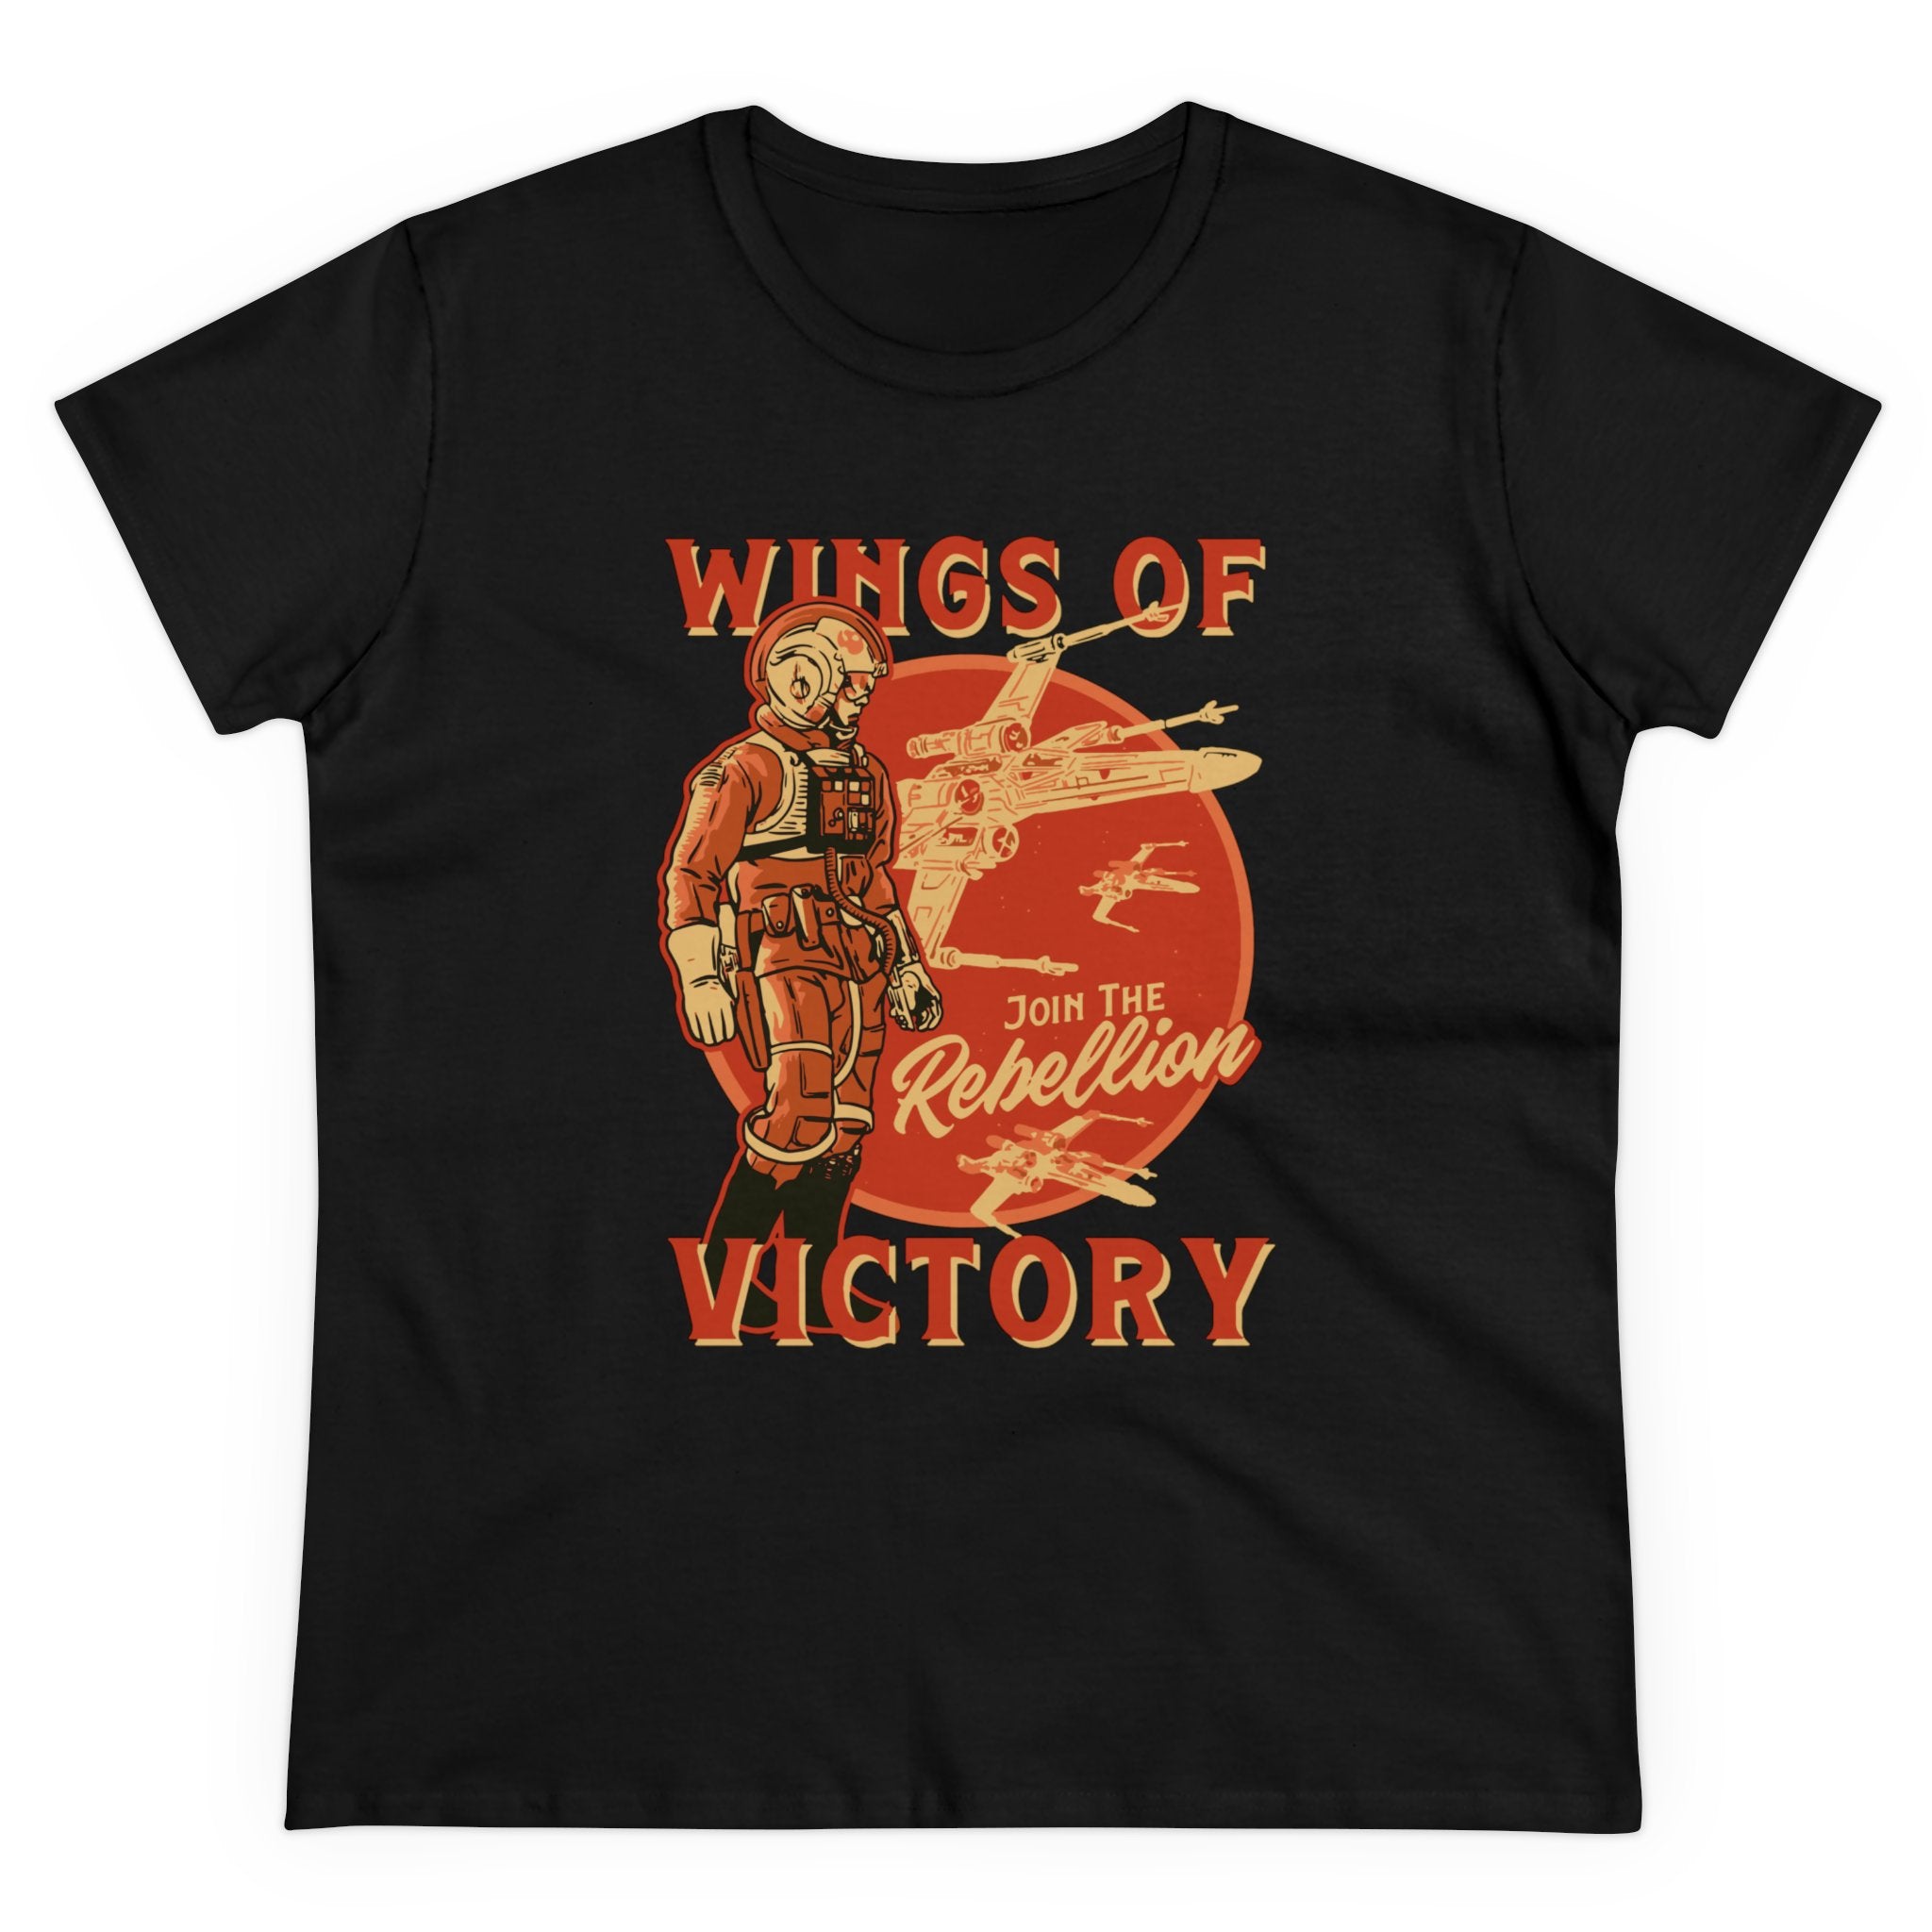 Black pre-shrunk t-shirt with a vintage-style graphic of a space pilot and aircraft, featuring the text "Wings of Victory - Women's Tee" and "Join the Rebellion" in red and yellow.